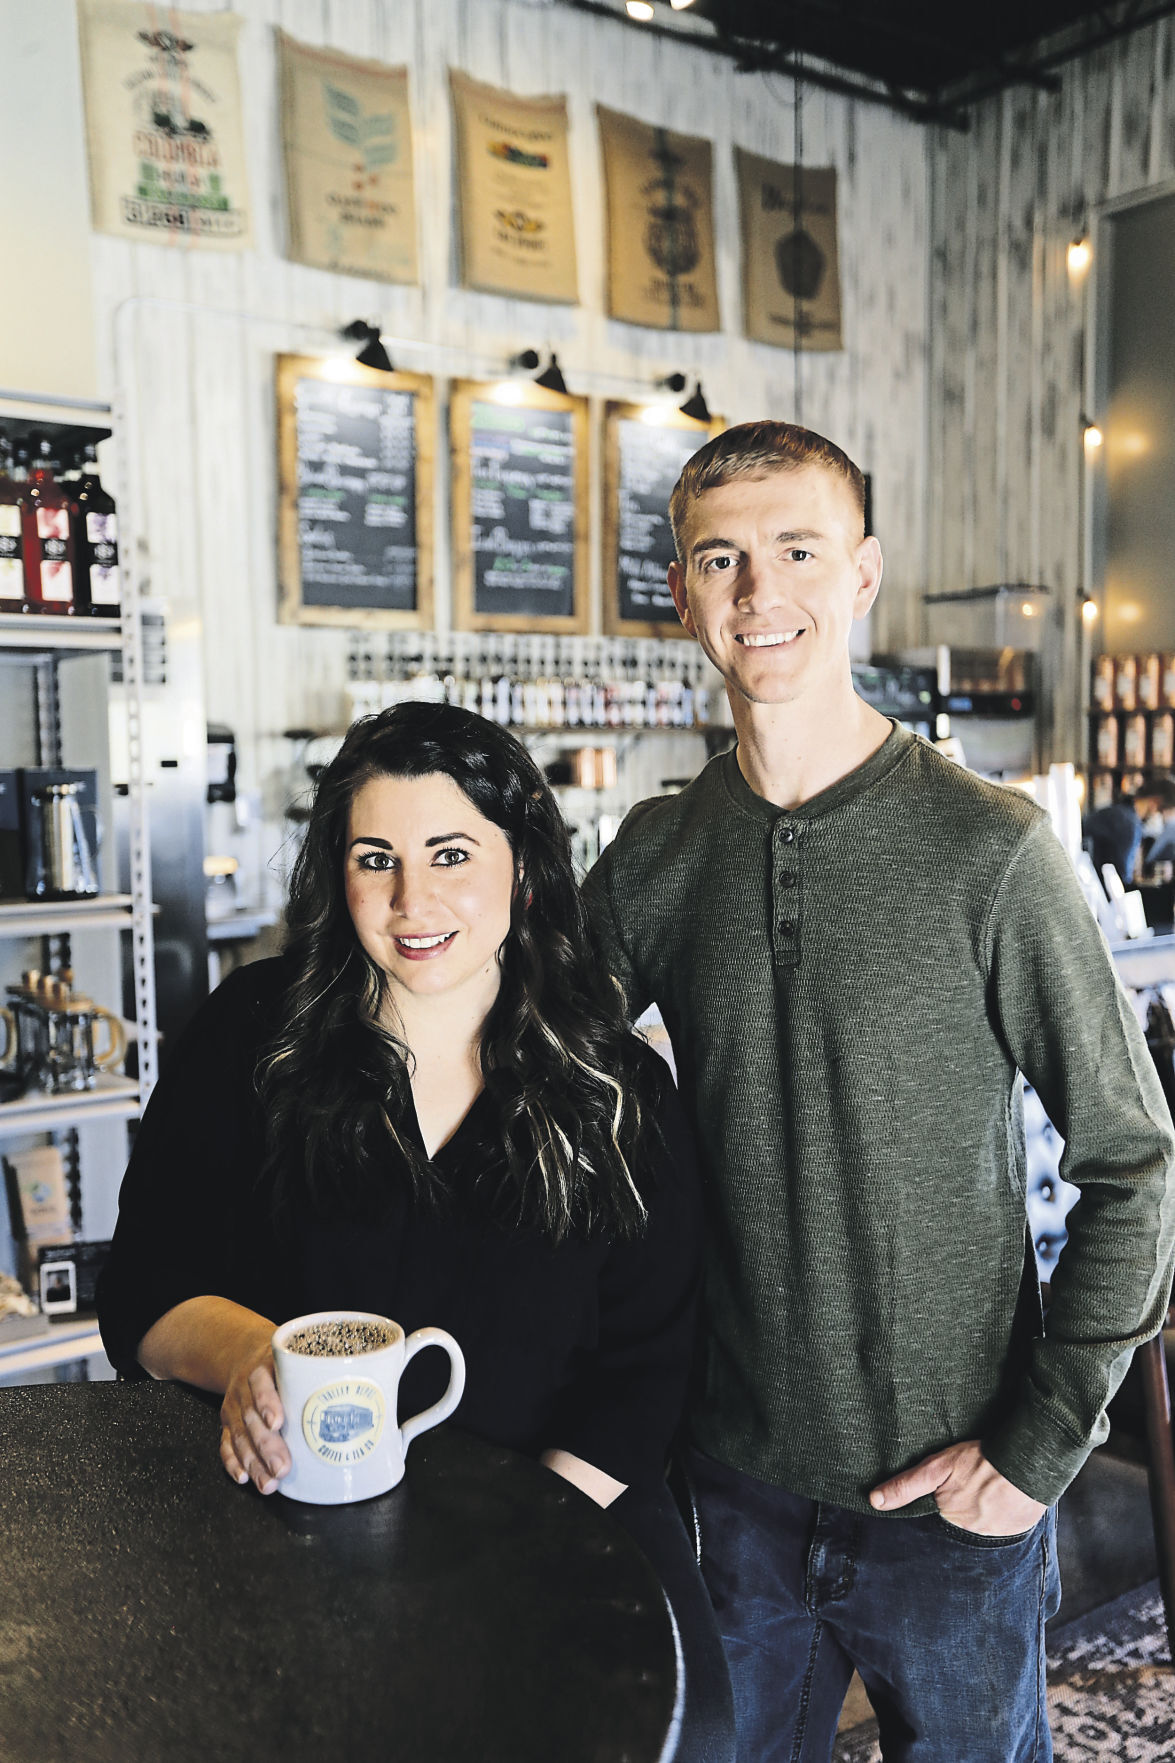 Joy Heller and her husband Corey own Trolley Depot Coffee & Tea Co. in Galena, Ill. PHOTO CREDIT: Dave Kettering